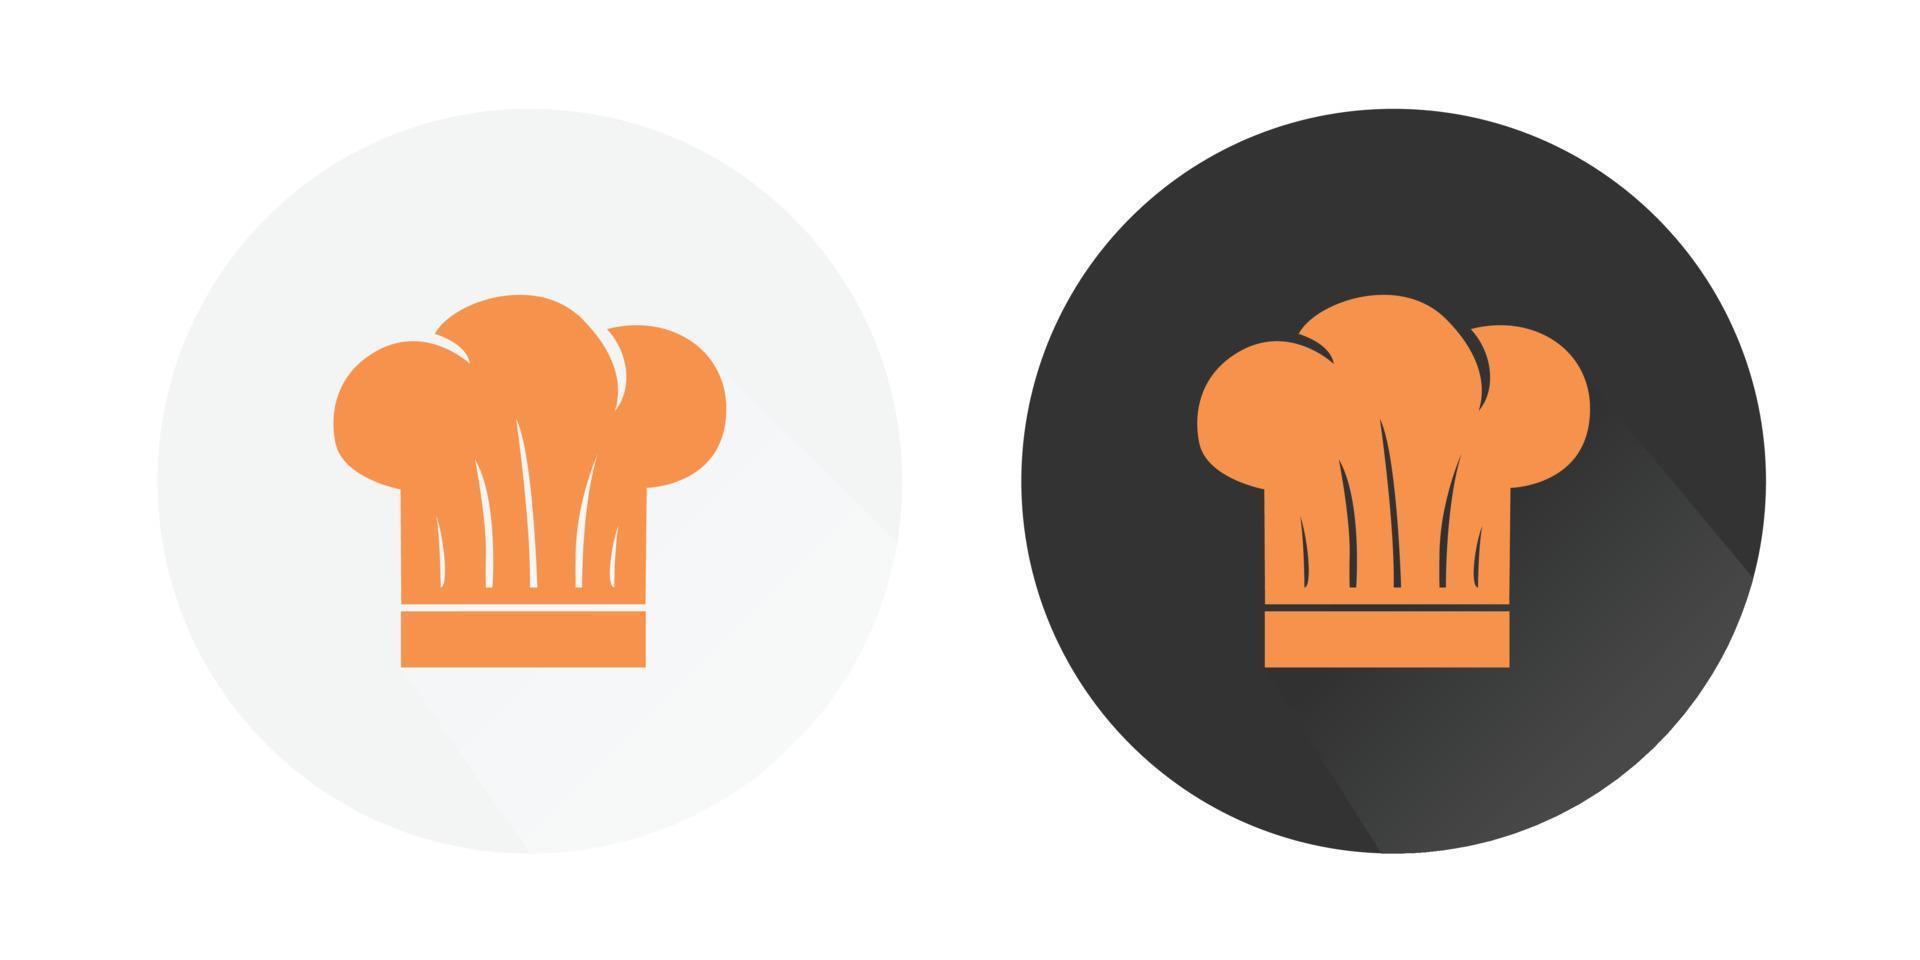 Chef hat icon, cooking hat icon, Bakery Logo, restaurant logo Colorful vector icons